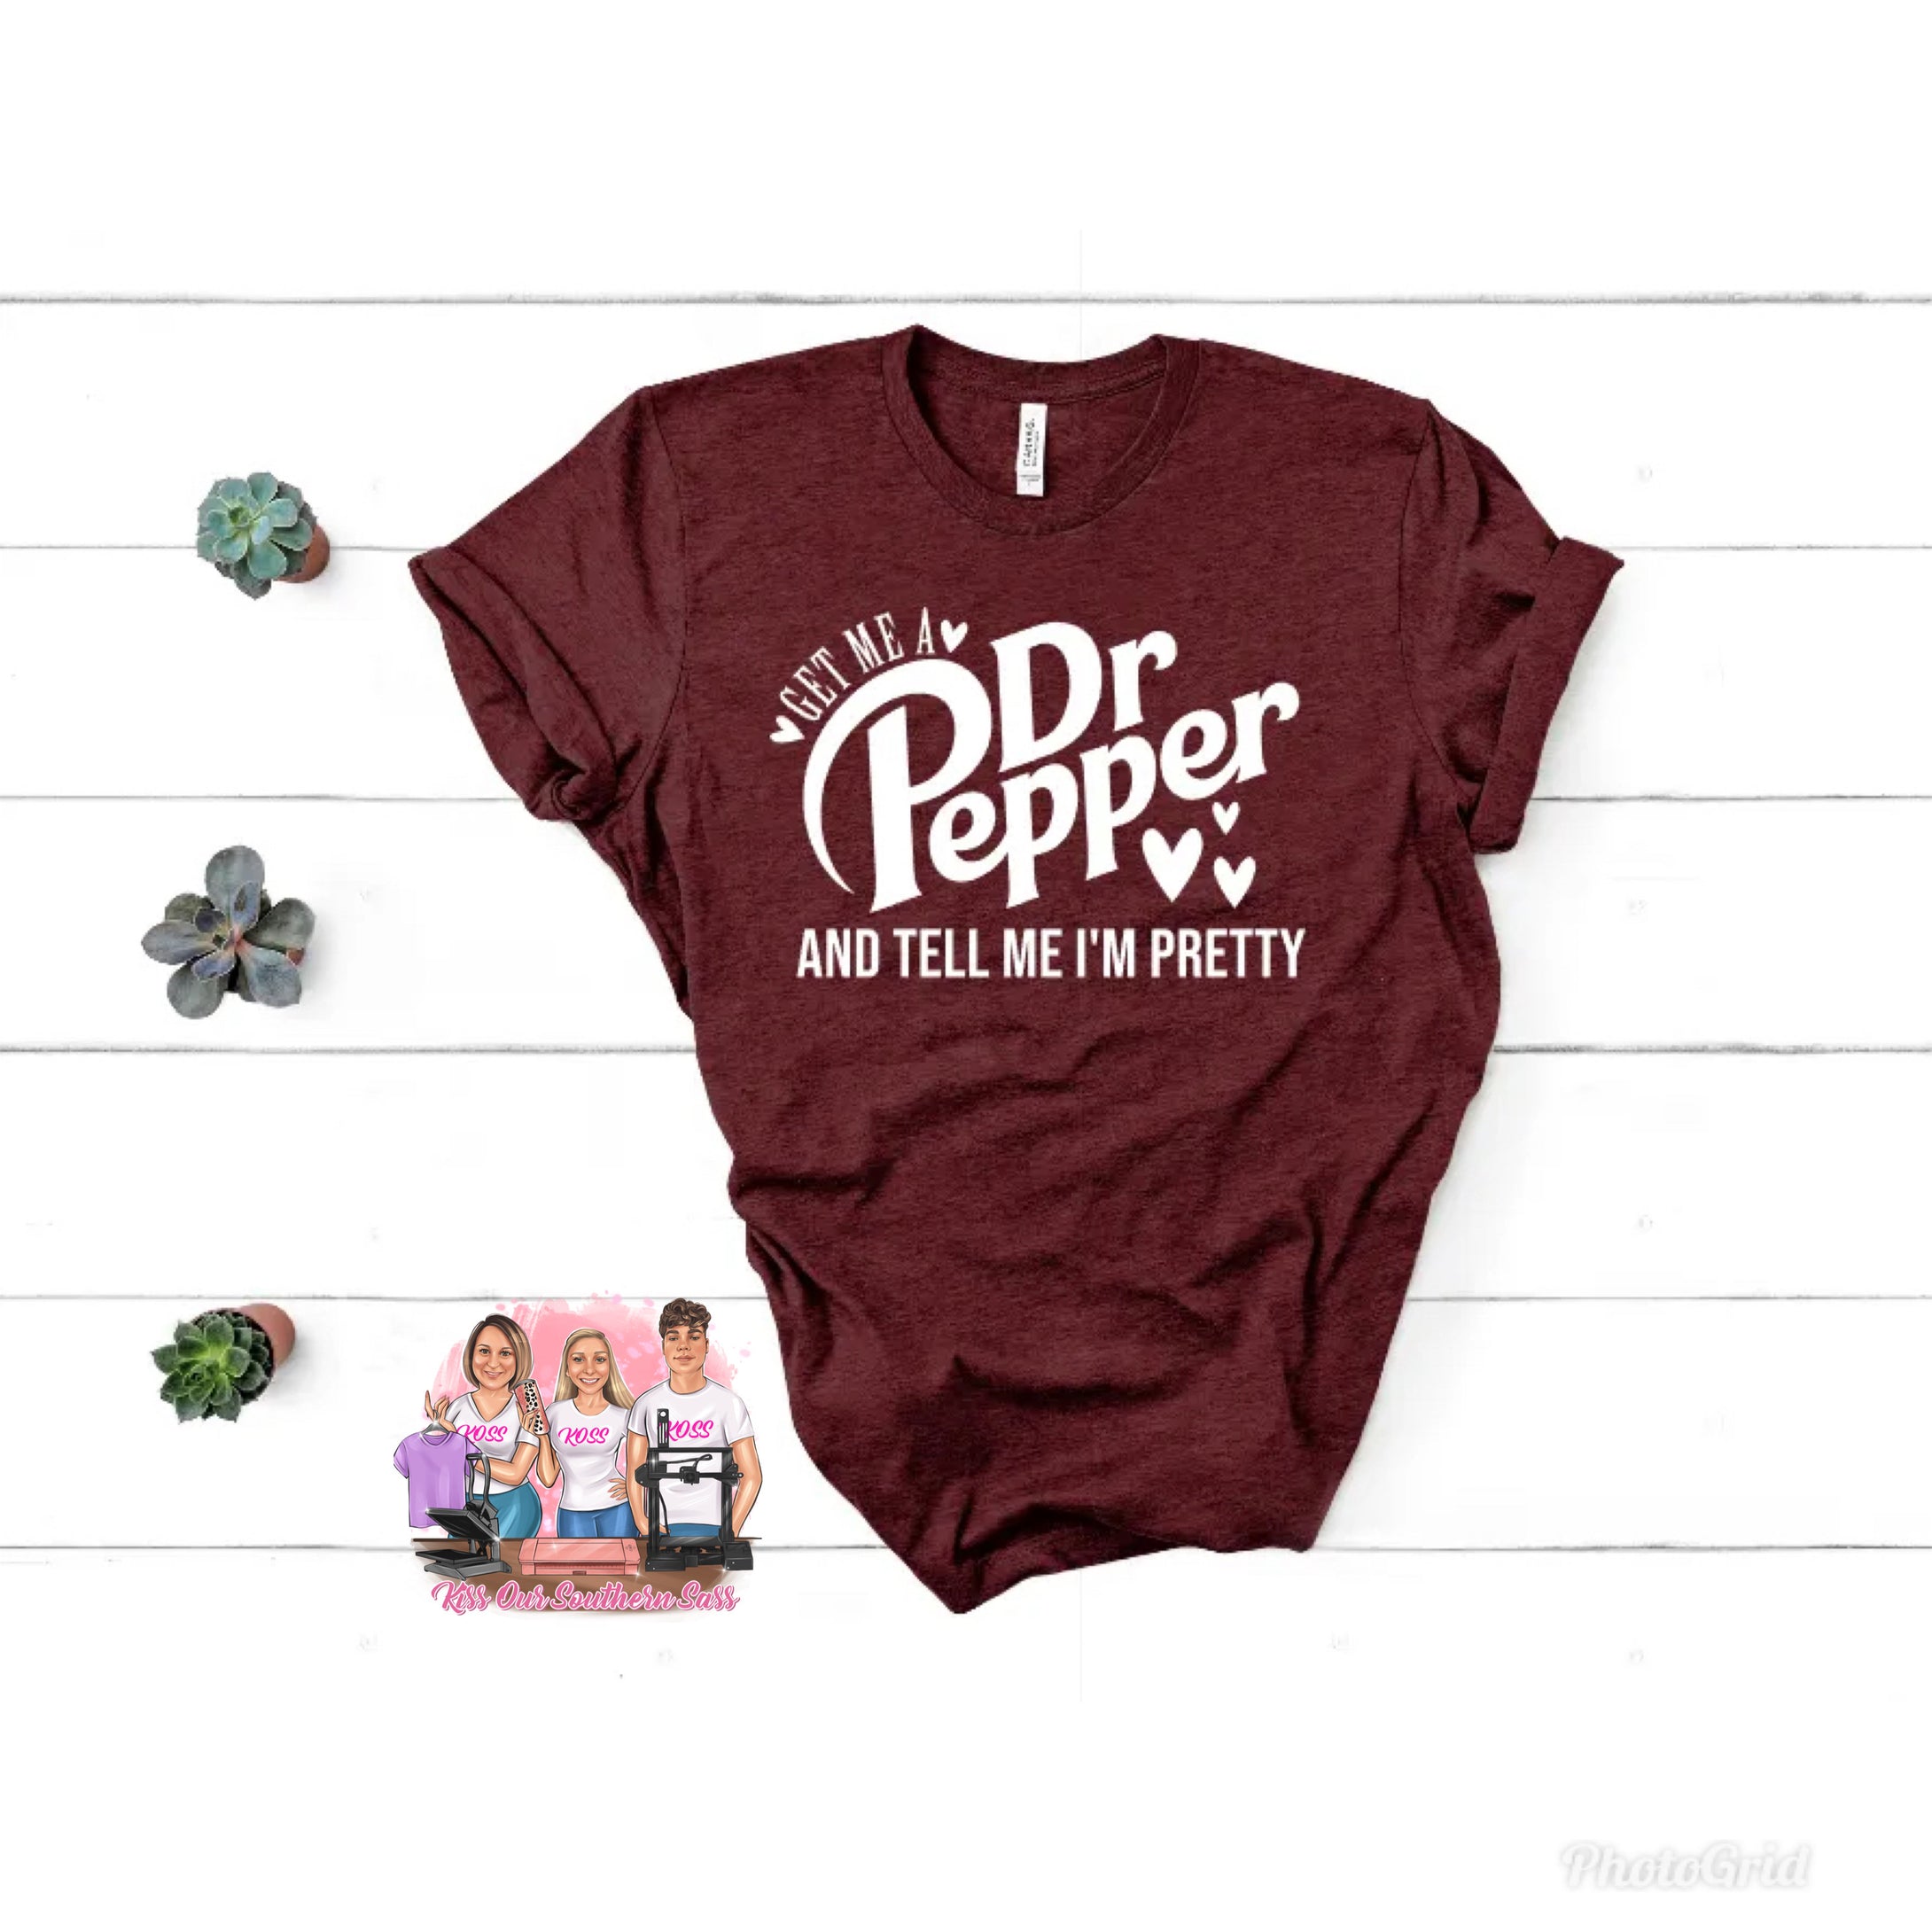 Get Me a Dr. Pepper and tell me I’m pretty